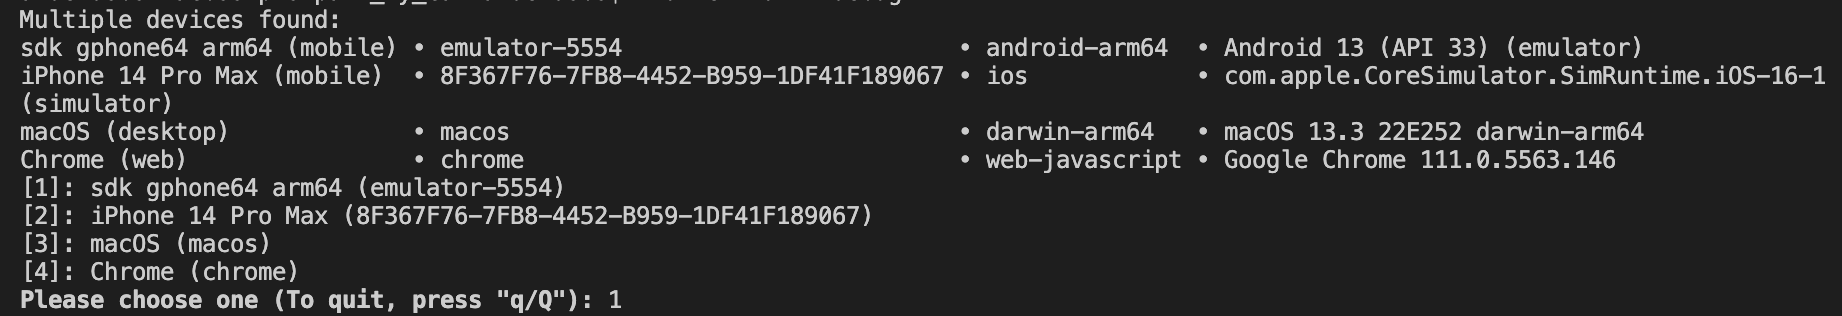 Selecting an Android device with the flutter CLI.